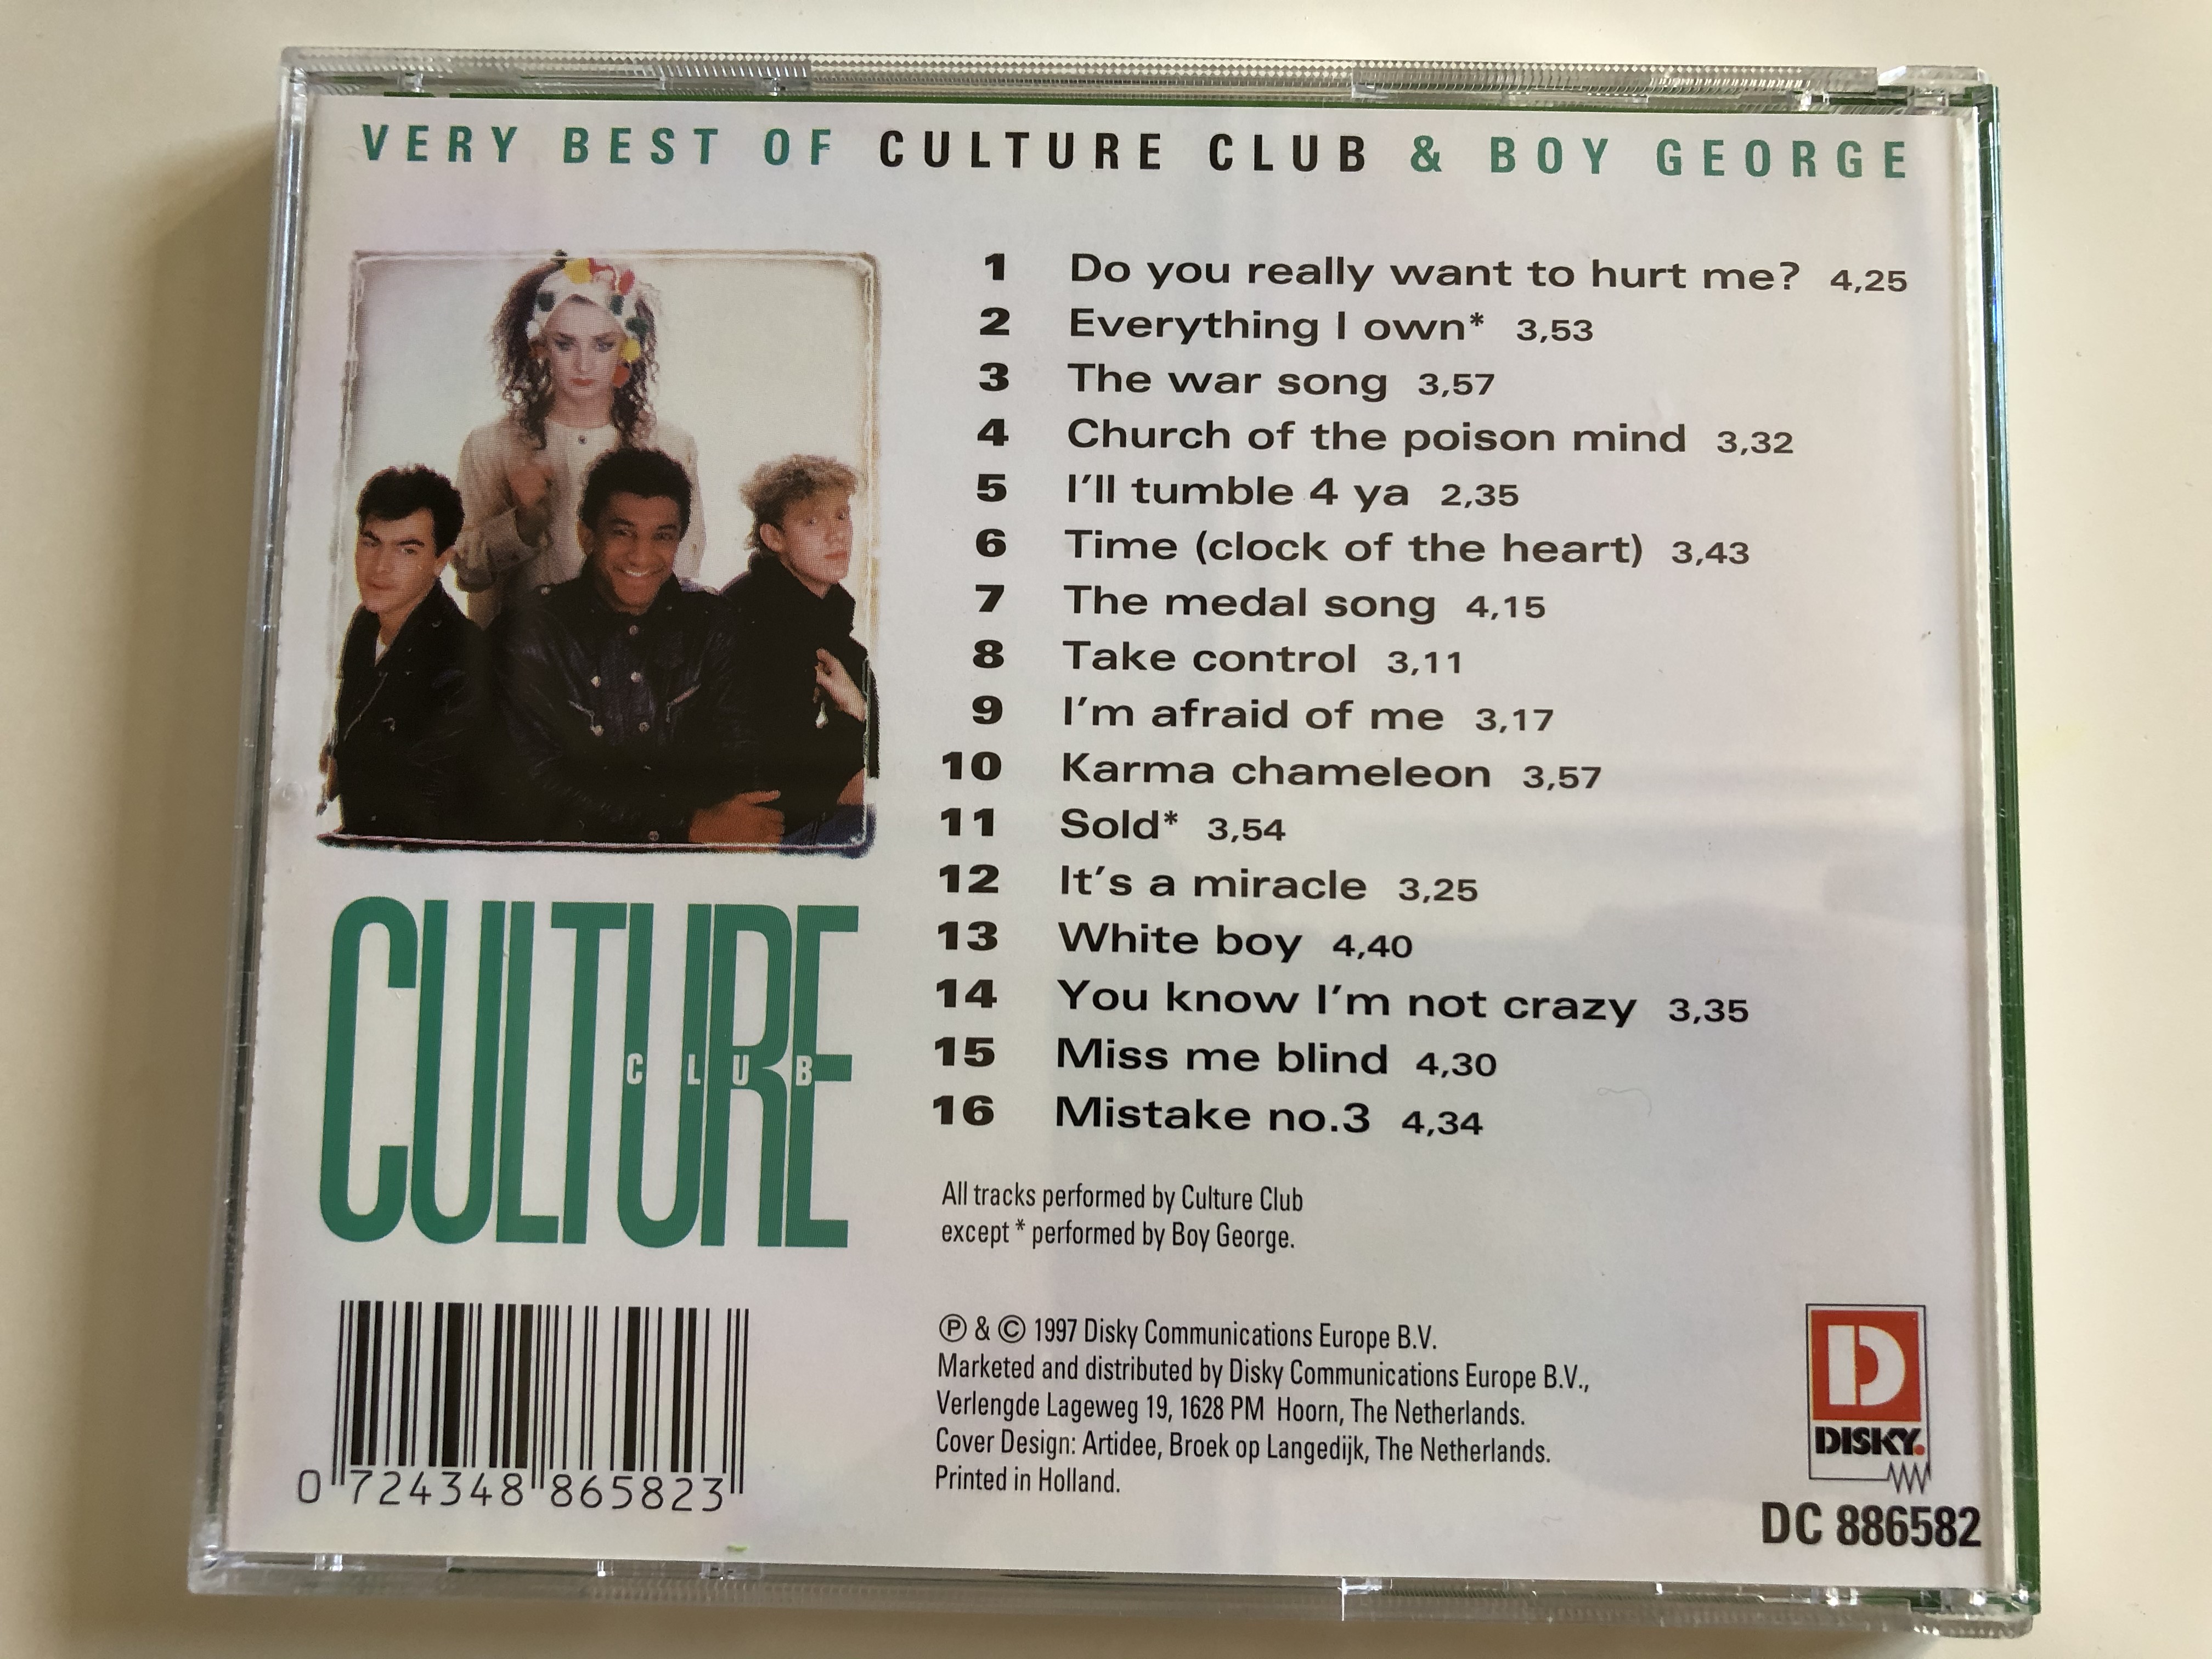 very-best-of-culture-club-boy-george-culture-club-do-you-really-want-to-hurt-me-the-war-song-everything-i-own-karma-chameleon-and-more-disky-audio-cd-1997-dc-886582-5-.jpg